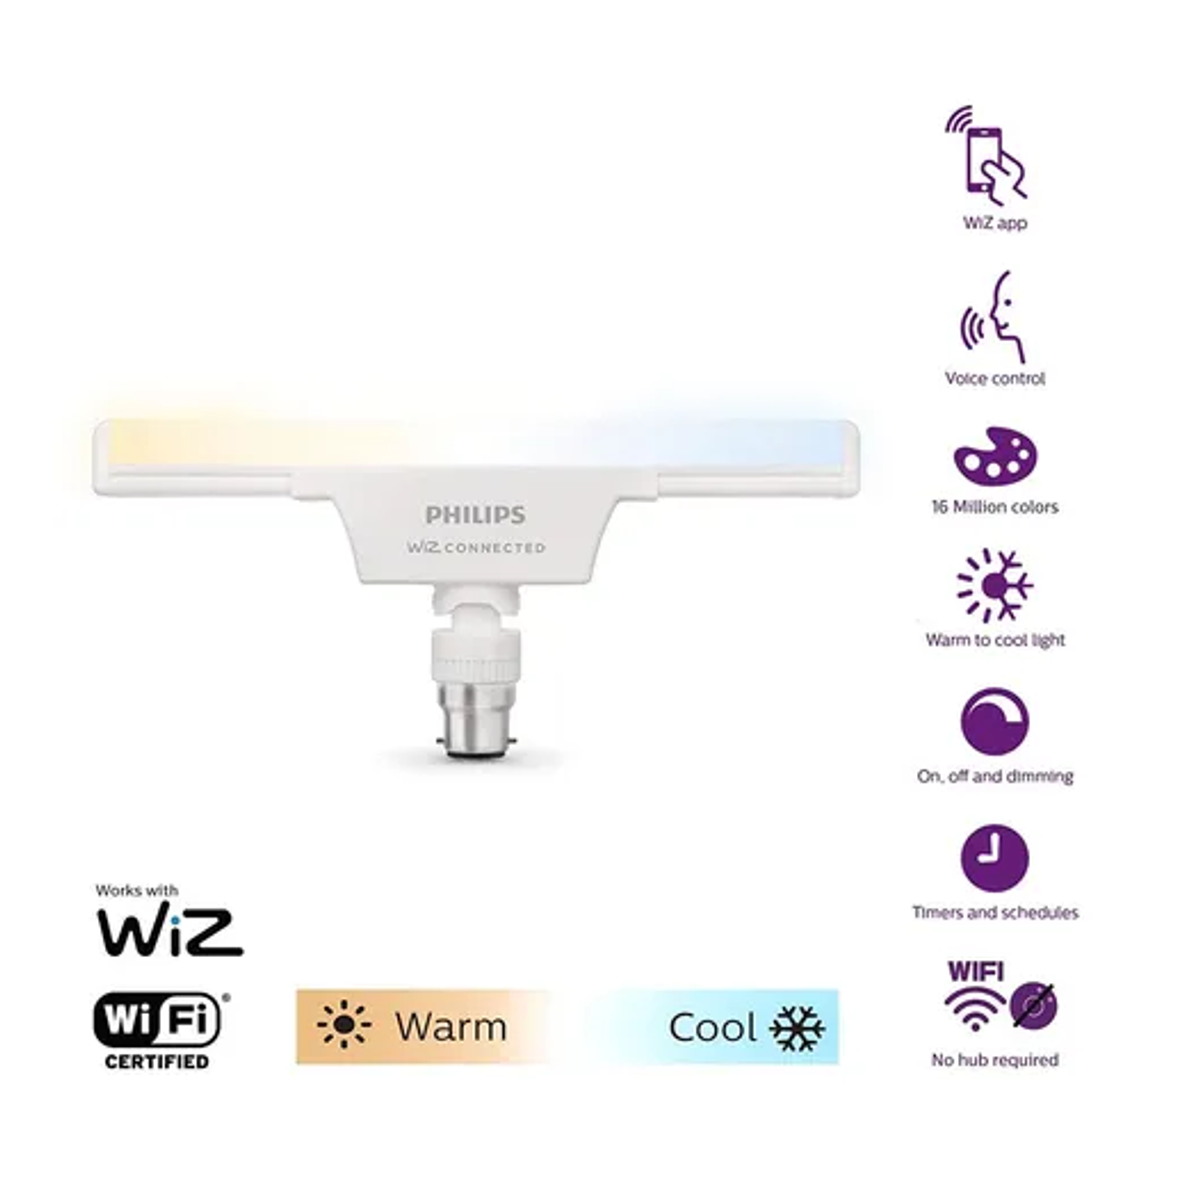 Philips Smart WiFi LED T-Bulb (Wiz Connected)